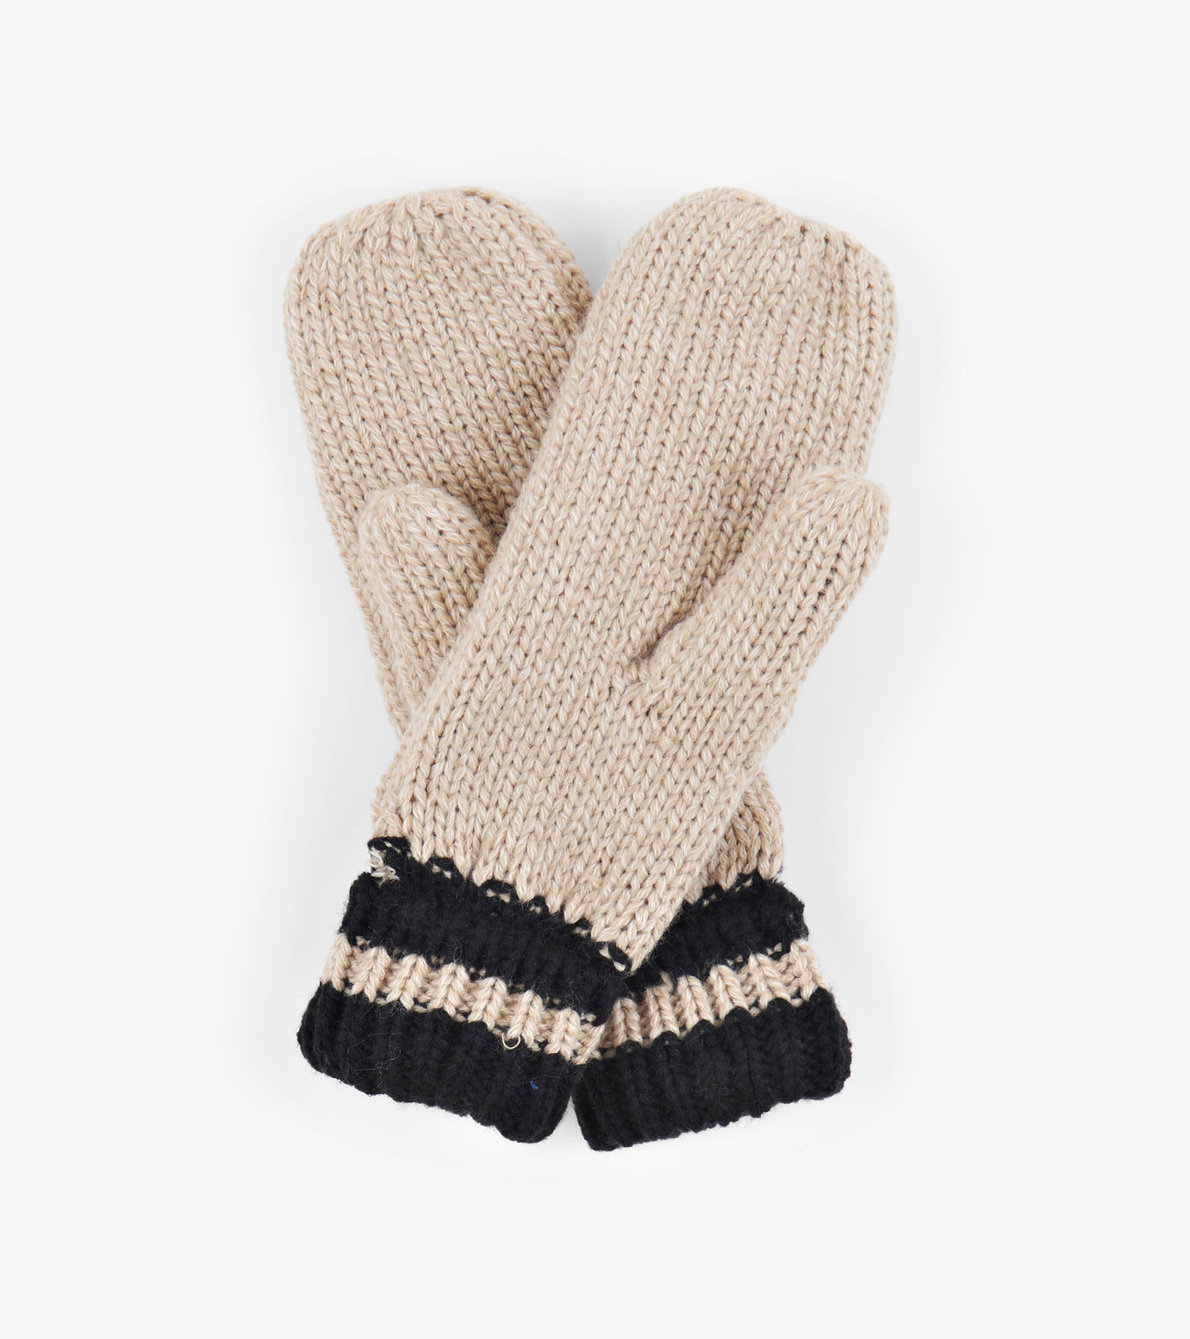 View larger image of Black Bear Adult Heritage Mittens